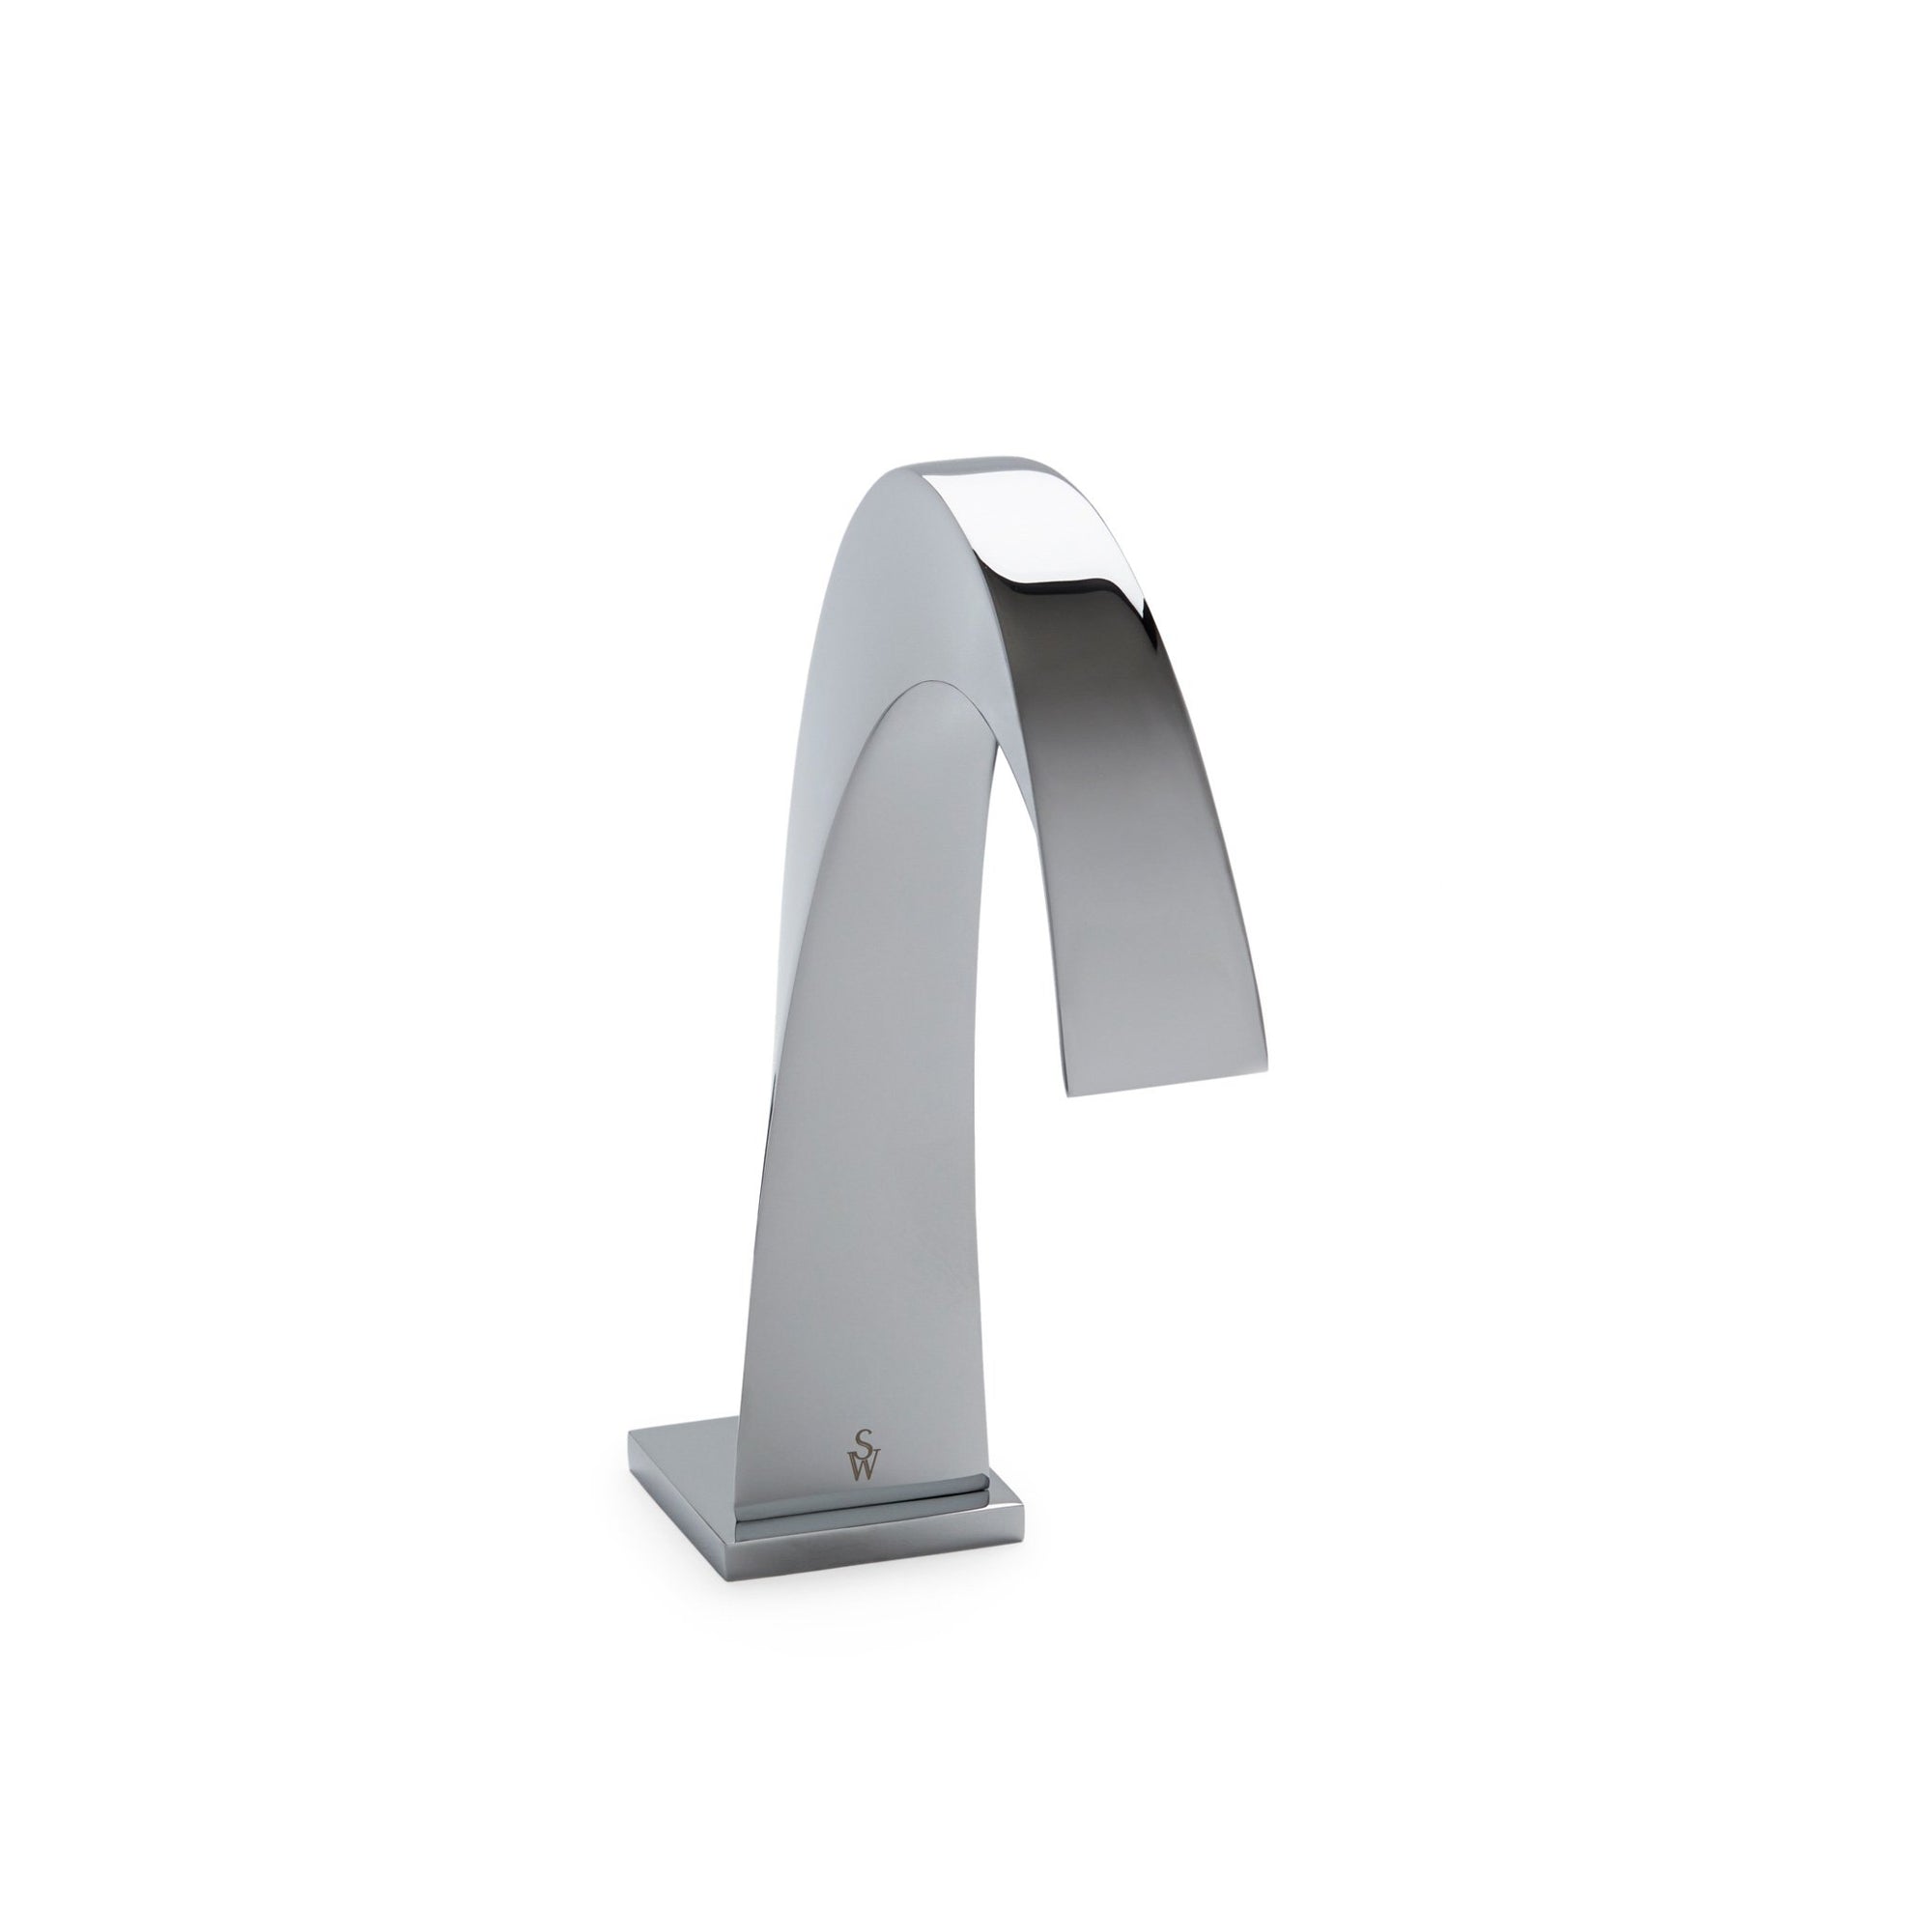 308DKT-CP Sherle Wagner International Arco Deck Mount Tub Spout in Polished Chrome metal finish